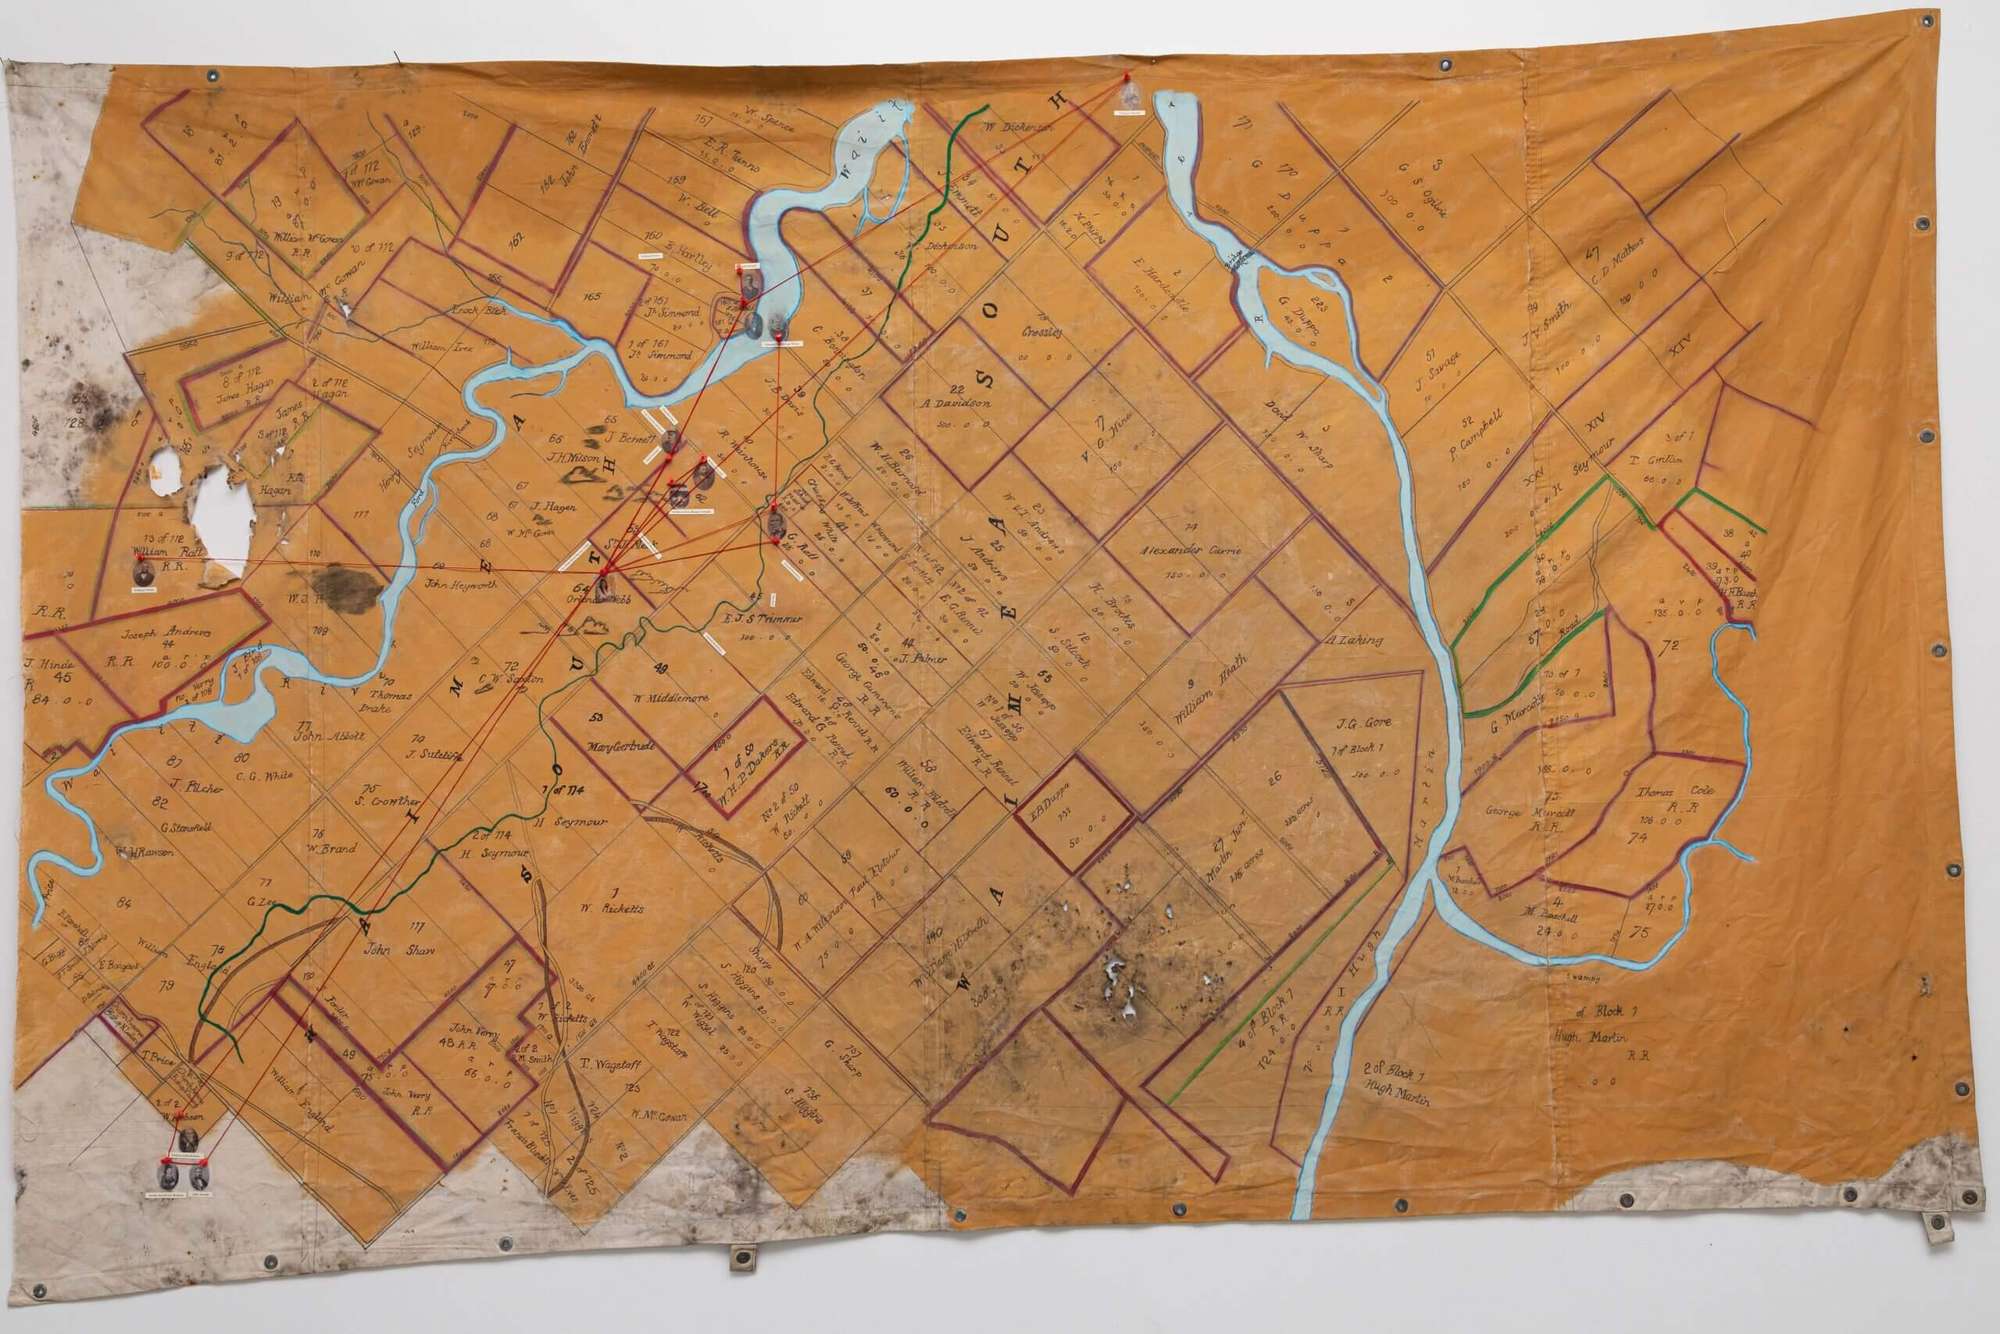 A map showing a township and a river